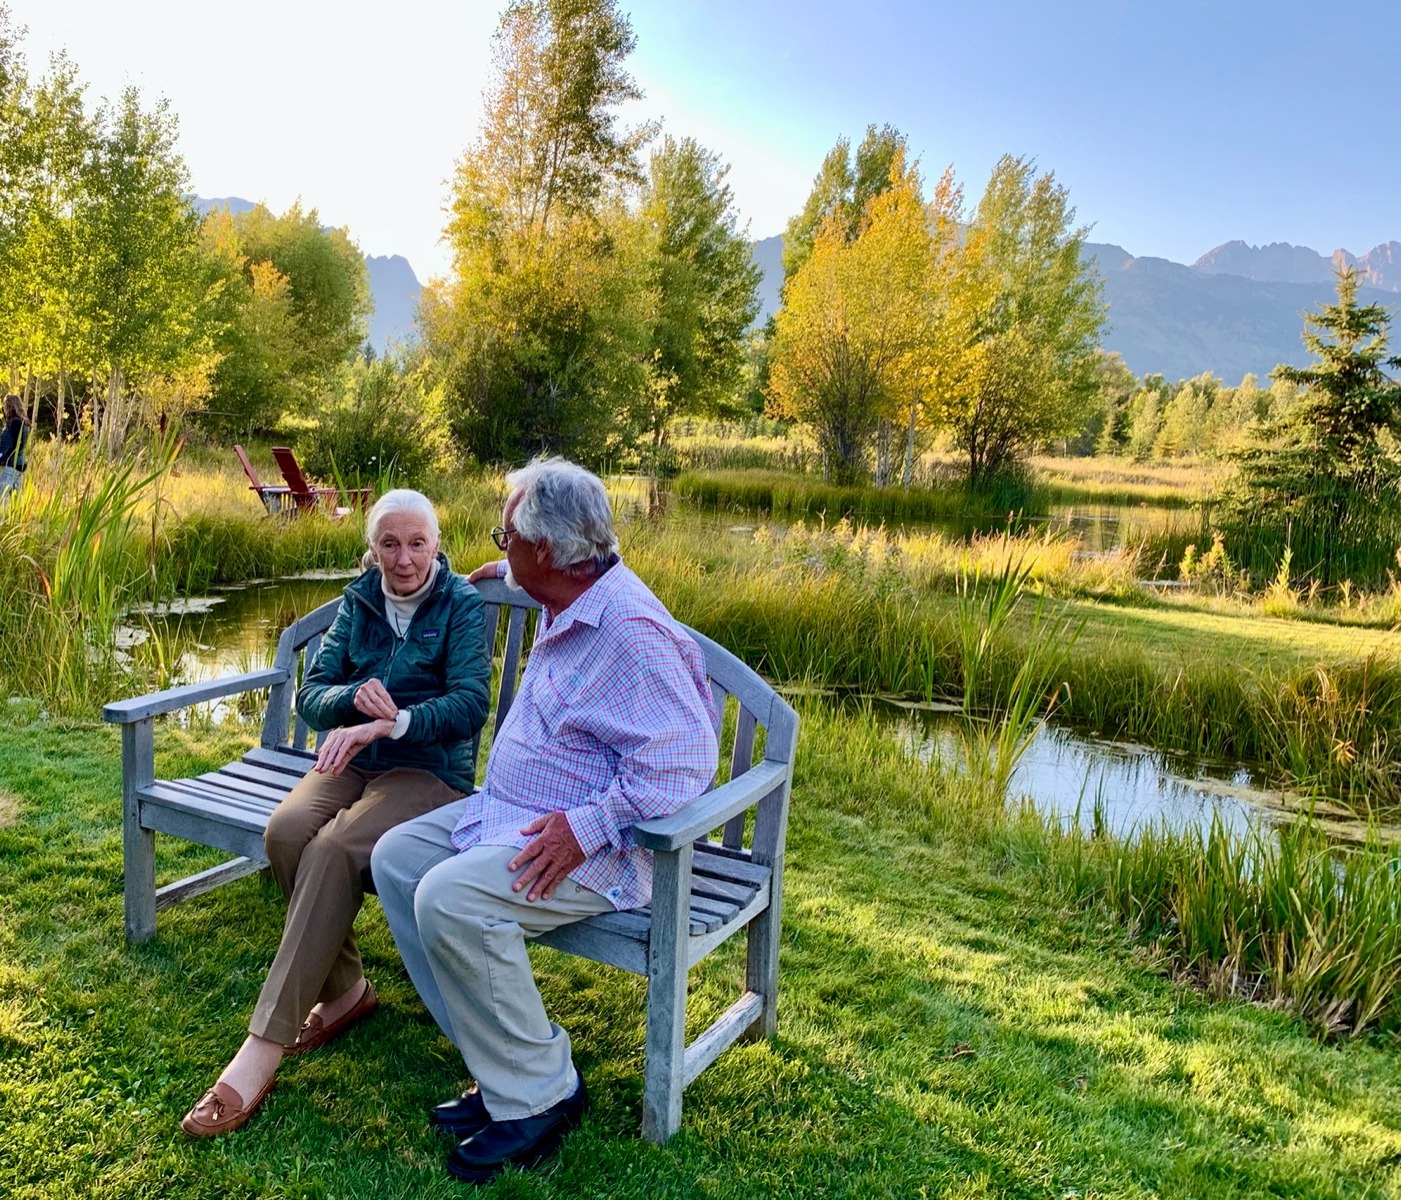 Bonded by friendship and conservation: Jane Goodall and Tom Mangelsen reminisce about their trip to Gombe Stream National Park in Tanzania during Goodall's visit to Jackson Hole in autumn 2019. Photo by Todd Wilkinson